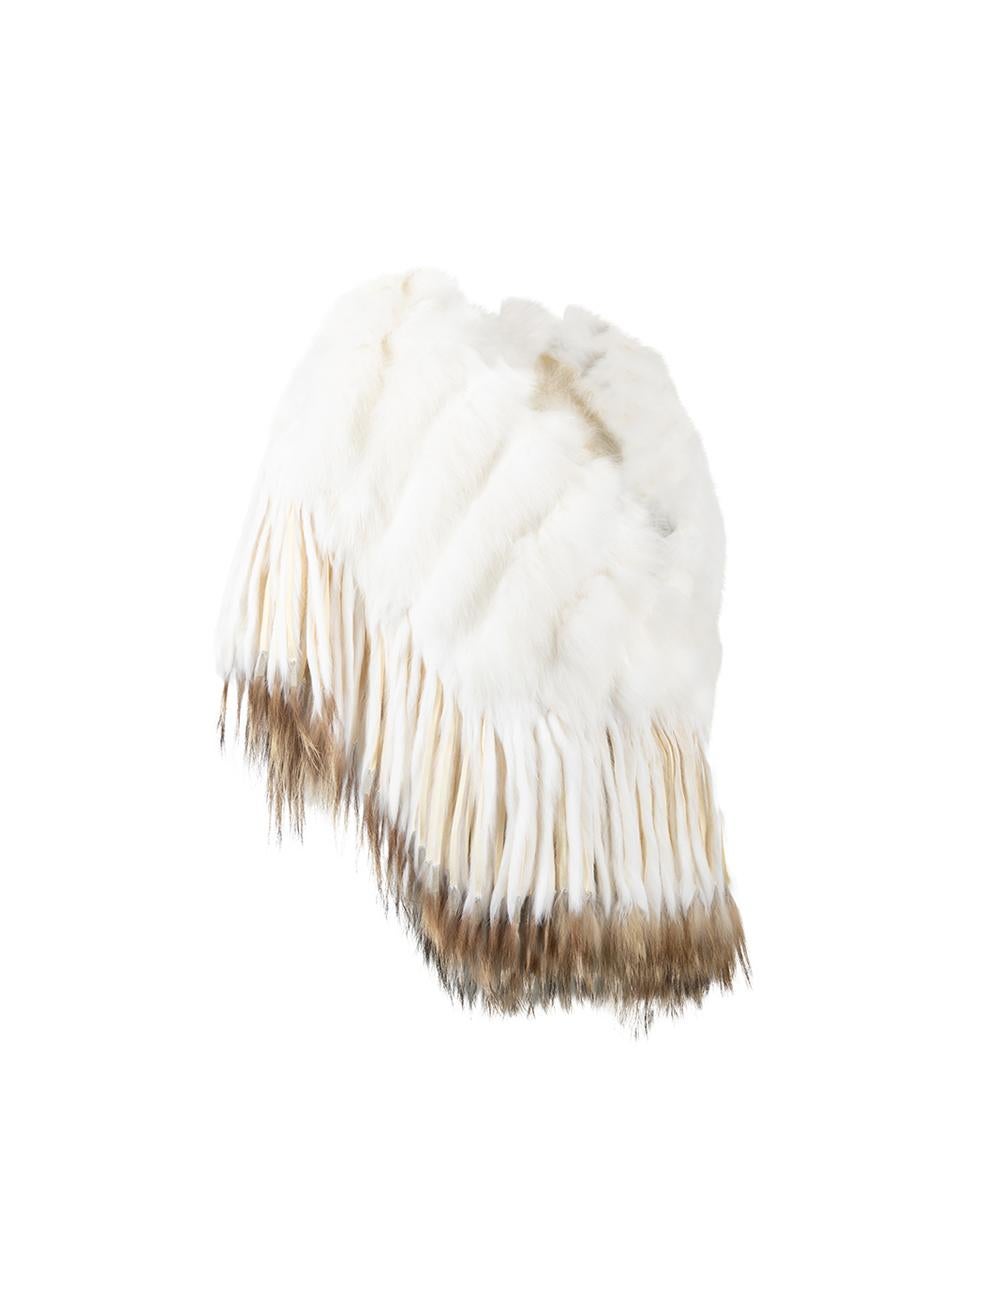 CONDITION is Very good. Minimal wear to shawl is evident. Minimal wear to the suede on the fur tassels which are worn on this used Unbranded designer resale item. 
 
 Details
  White
 Fox fur
 Shawl
 Tassel fringe finishing
 
 
 Composition
 70% Fox